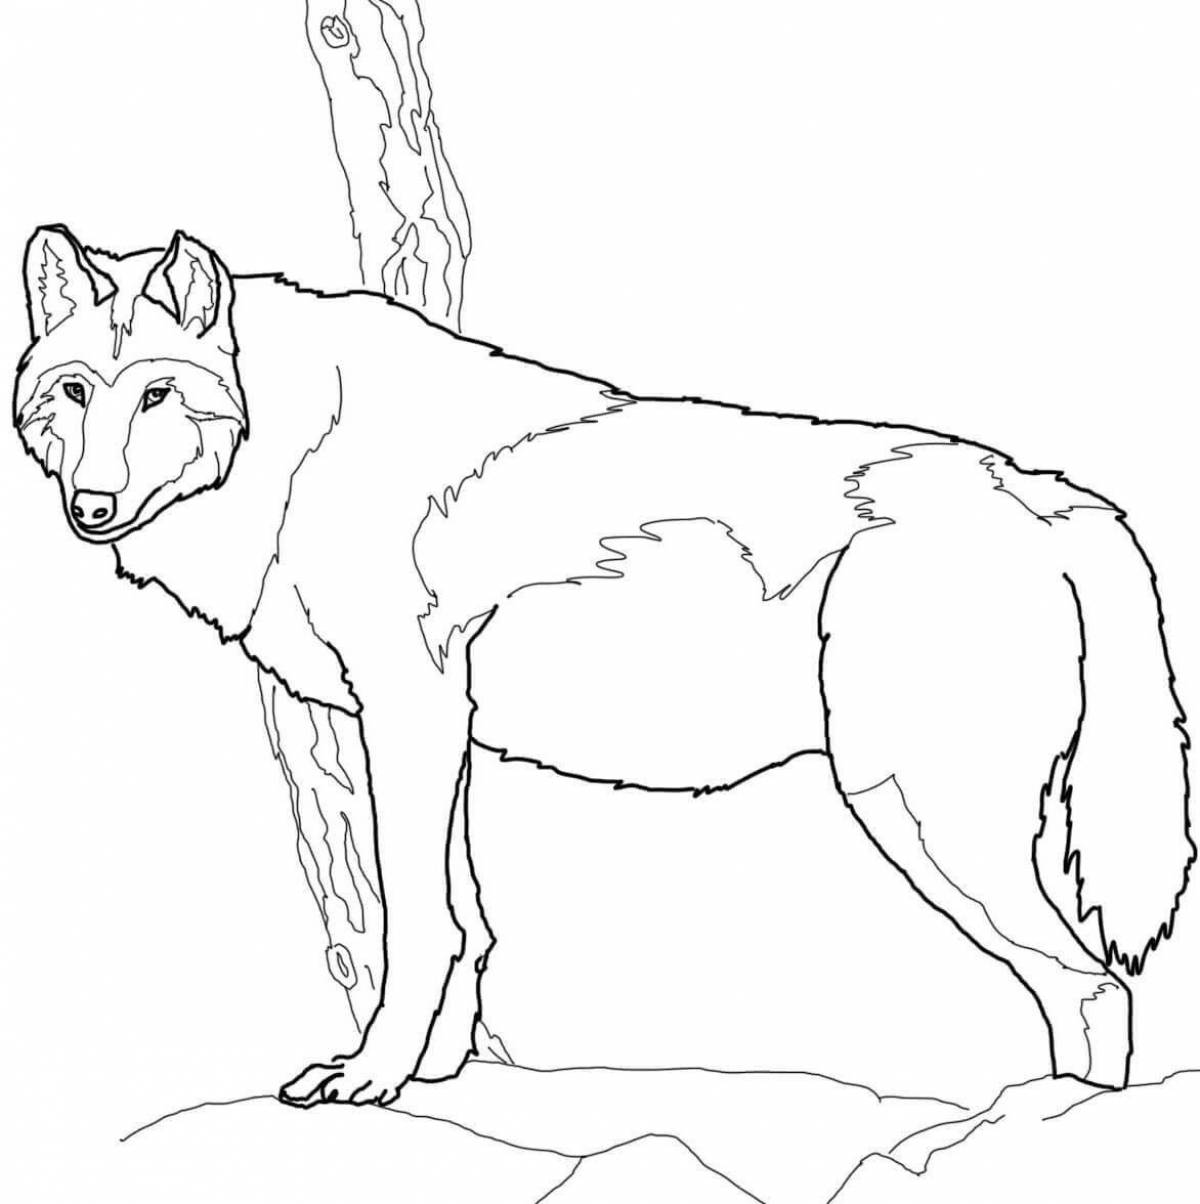 Coloring wolf for children 6-7 years old